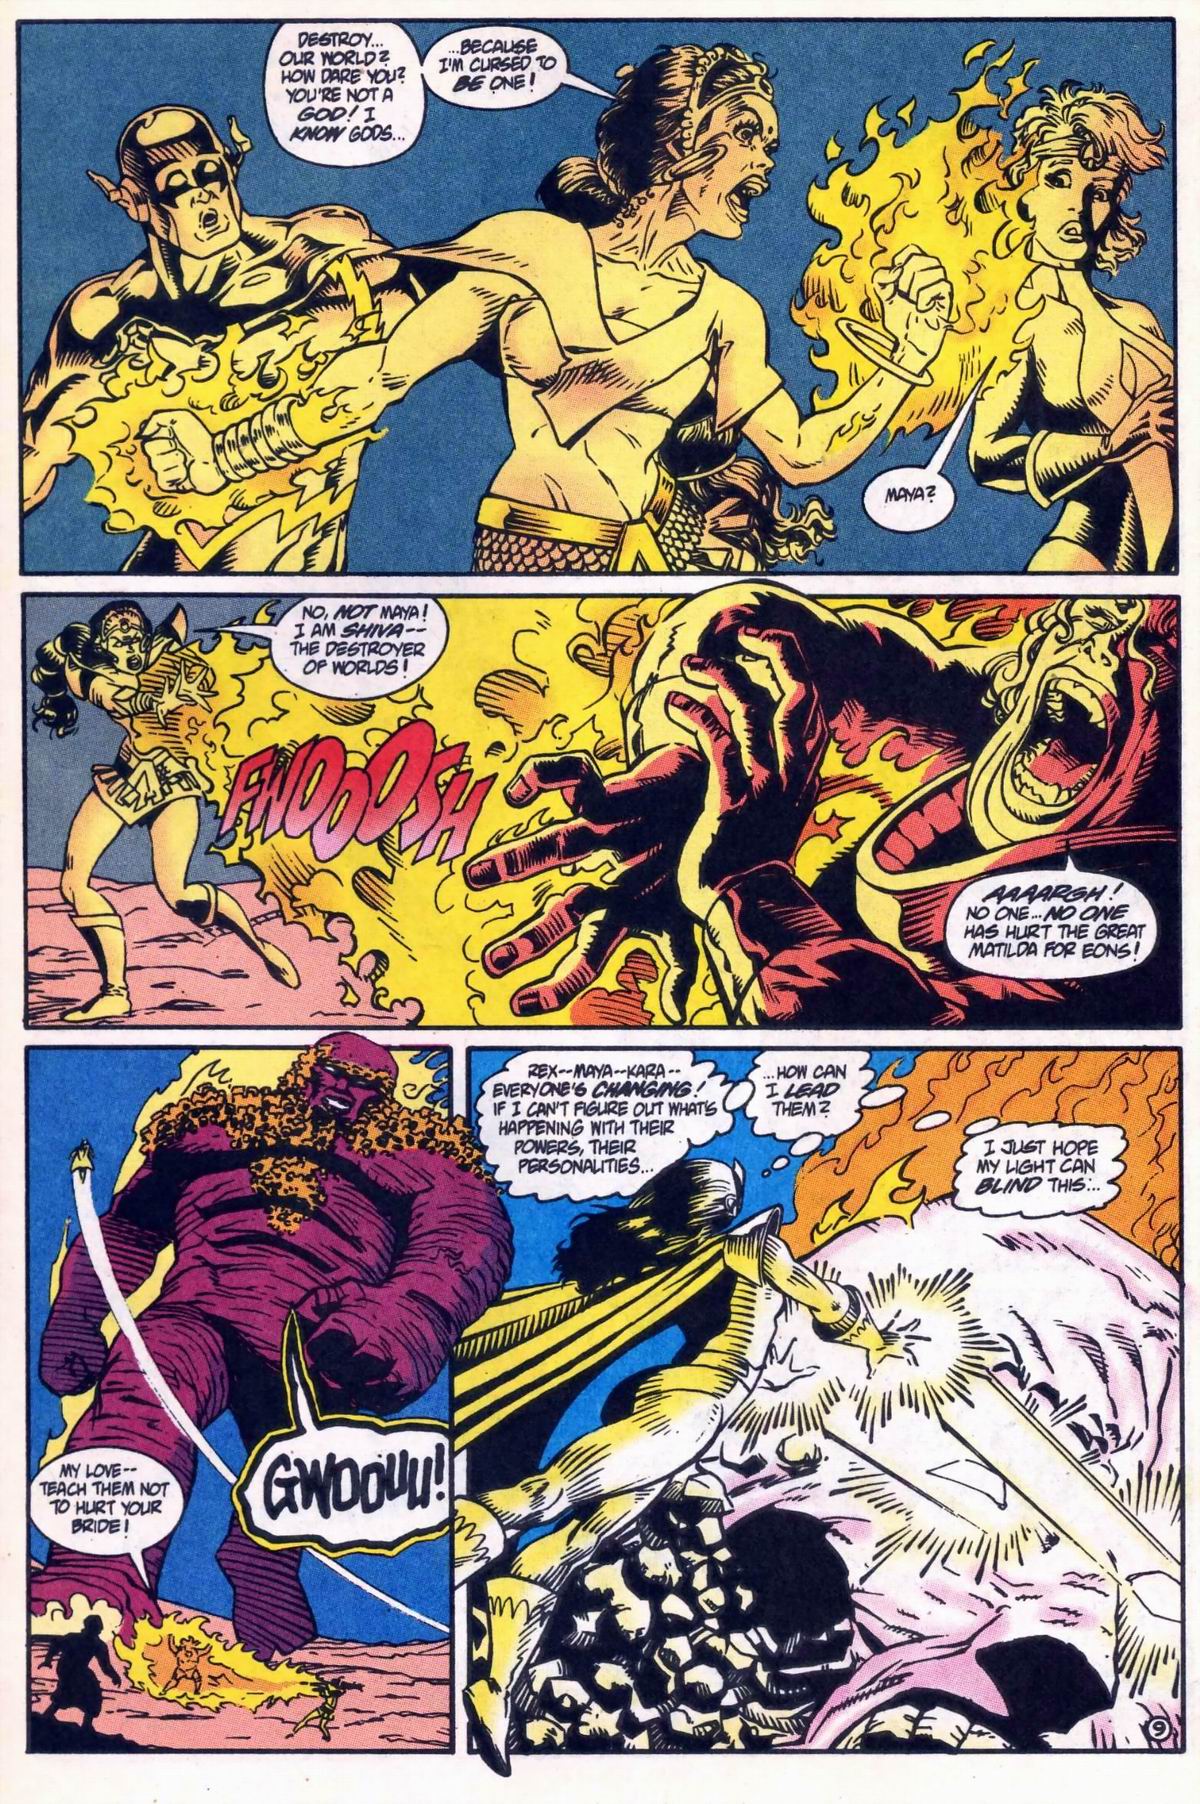 Justice League International (1993) 62 Page 10